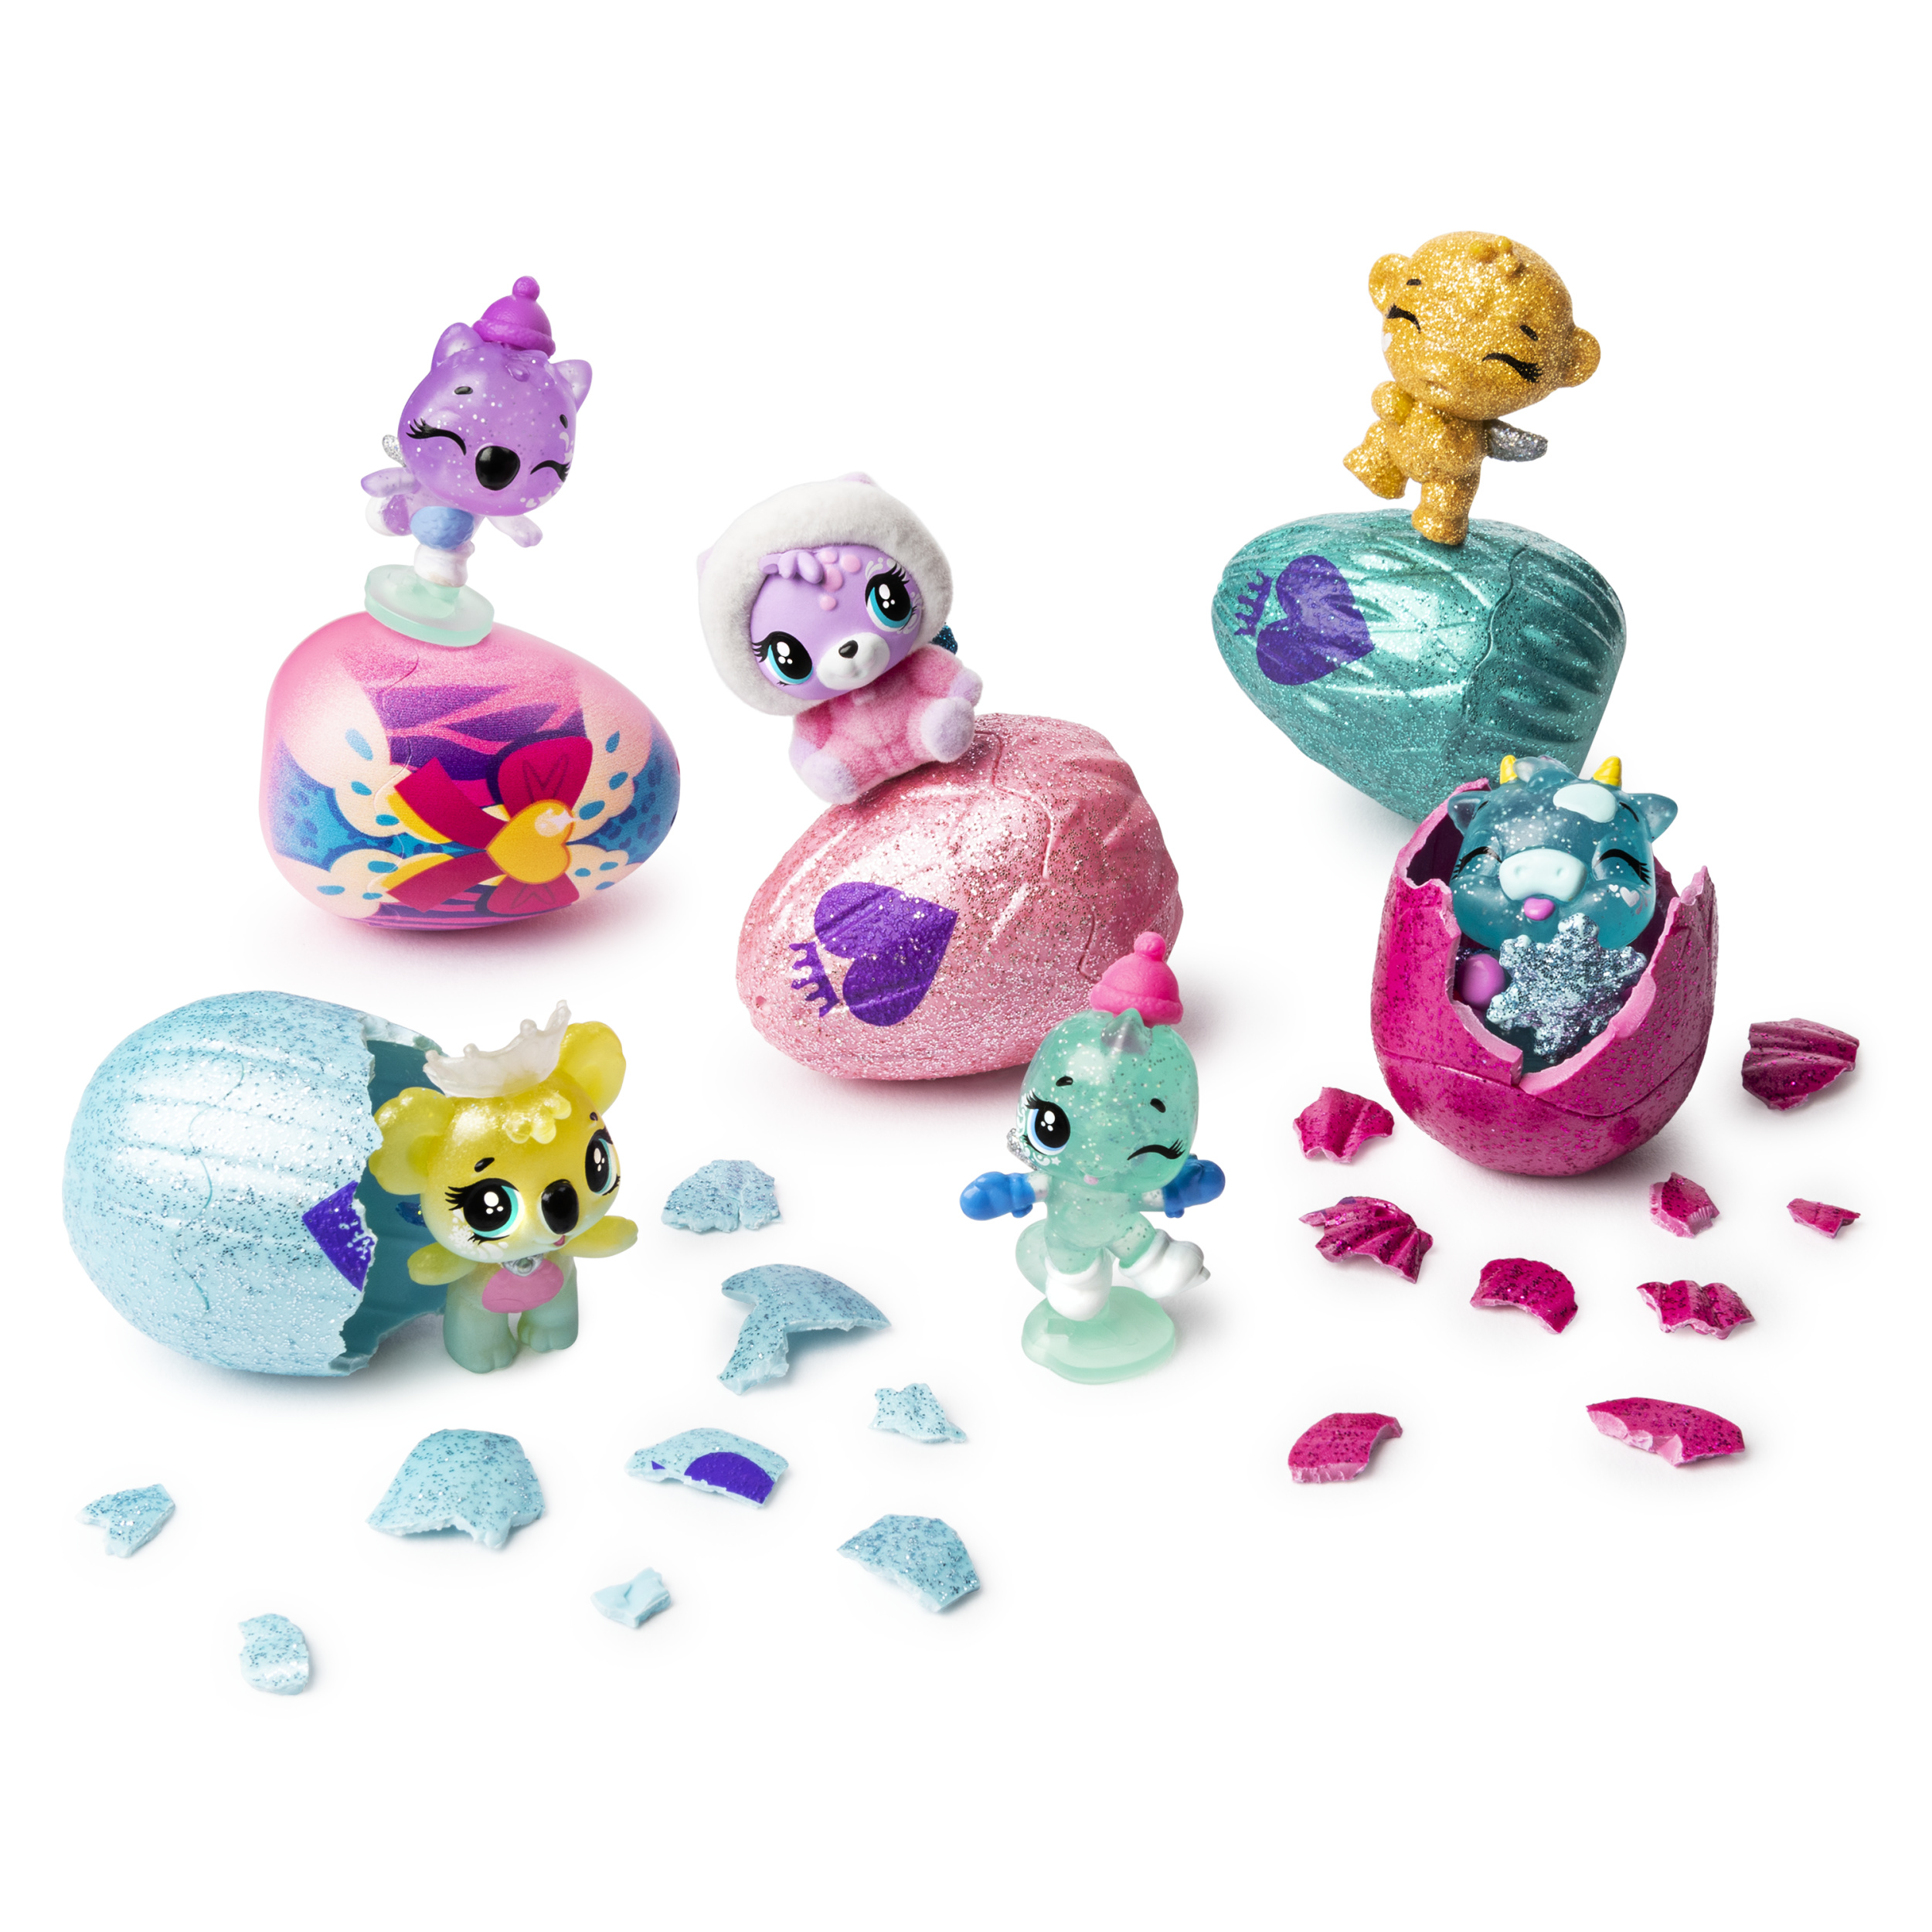 Hatchimals CollEGGtibles, Royal Multipack with 4 Hatchimals and Accessories, for Kids Aged 5 and up (Styles May Vary) - image 4 of 8